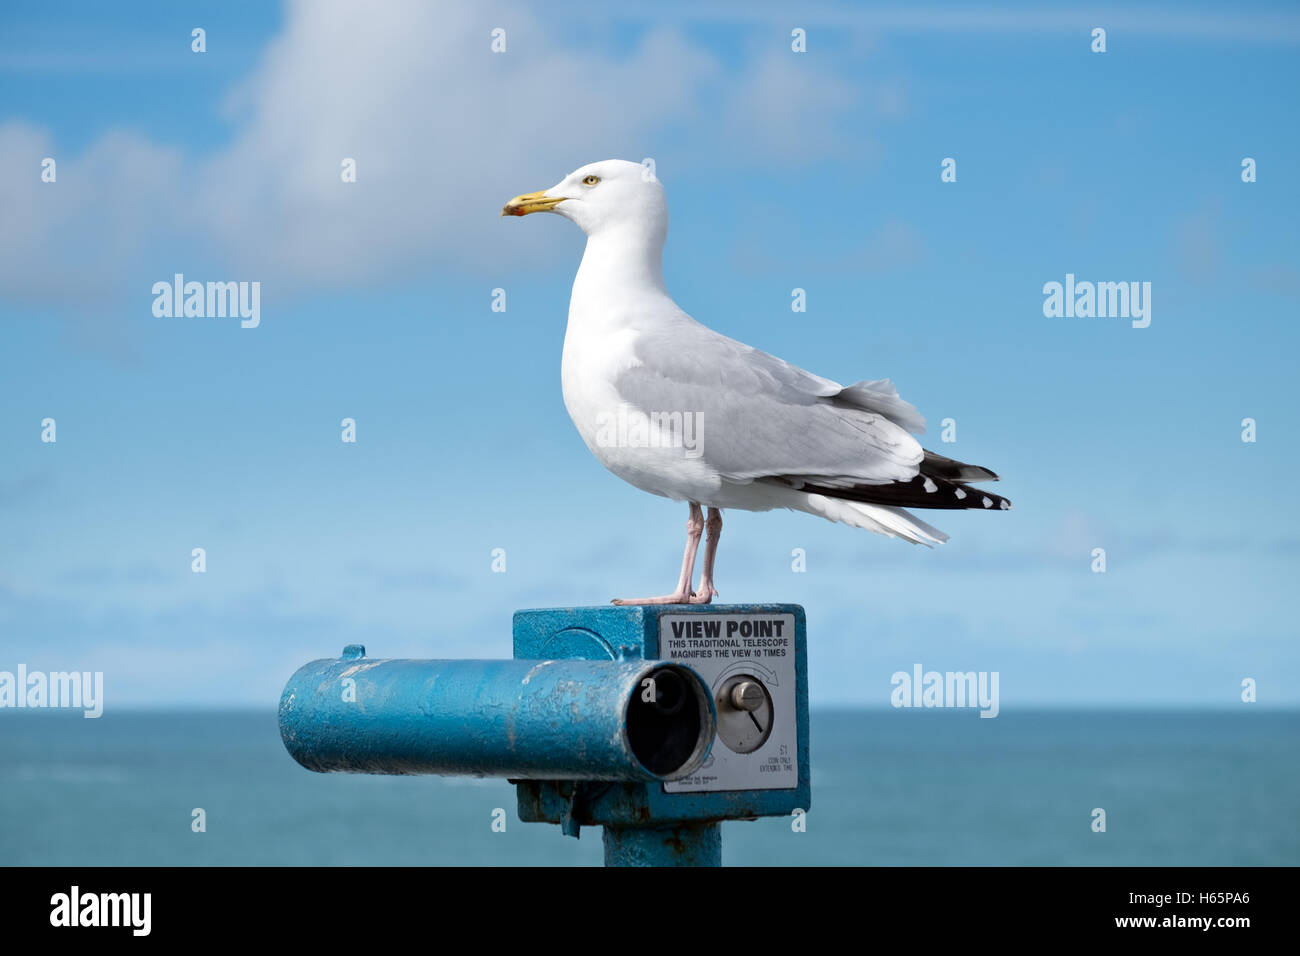 A seagull perched on a blue pay telescope against the sea & a blue sky Stock Photo